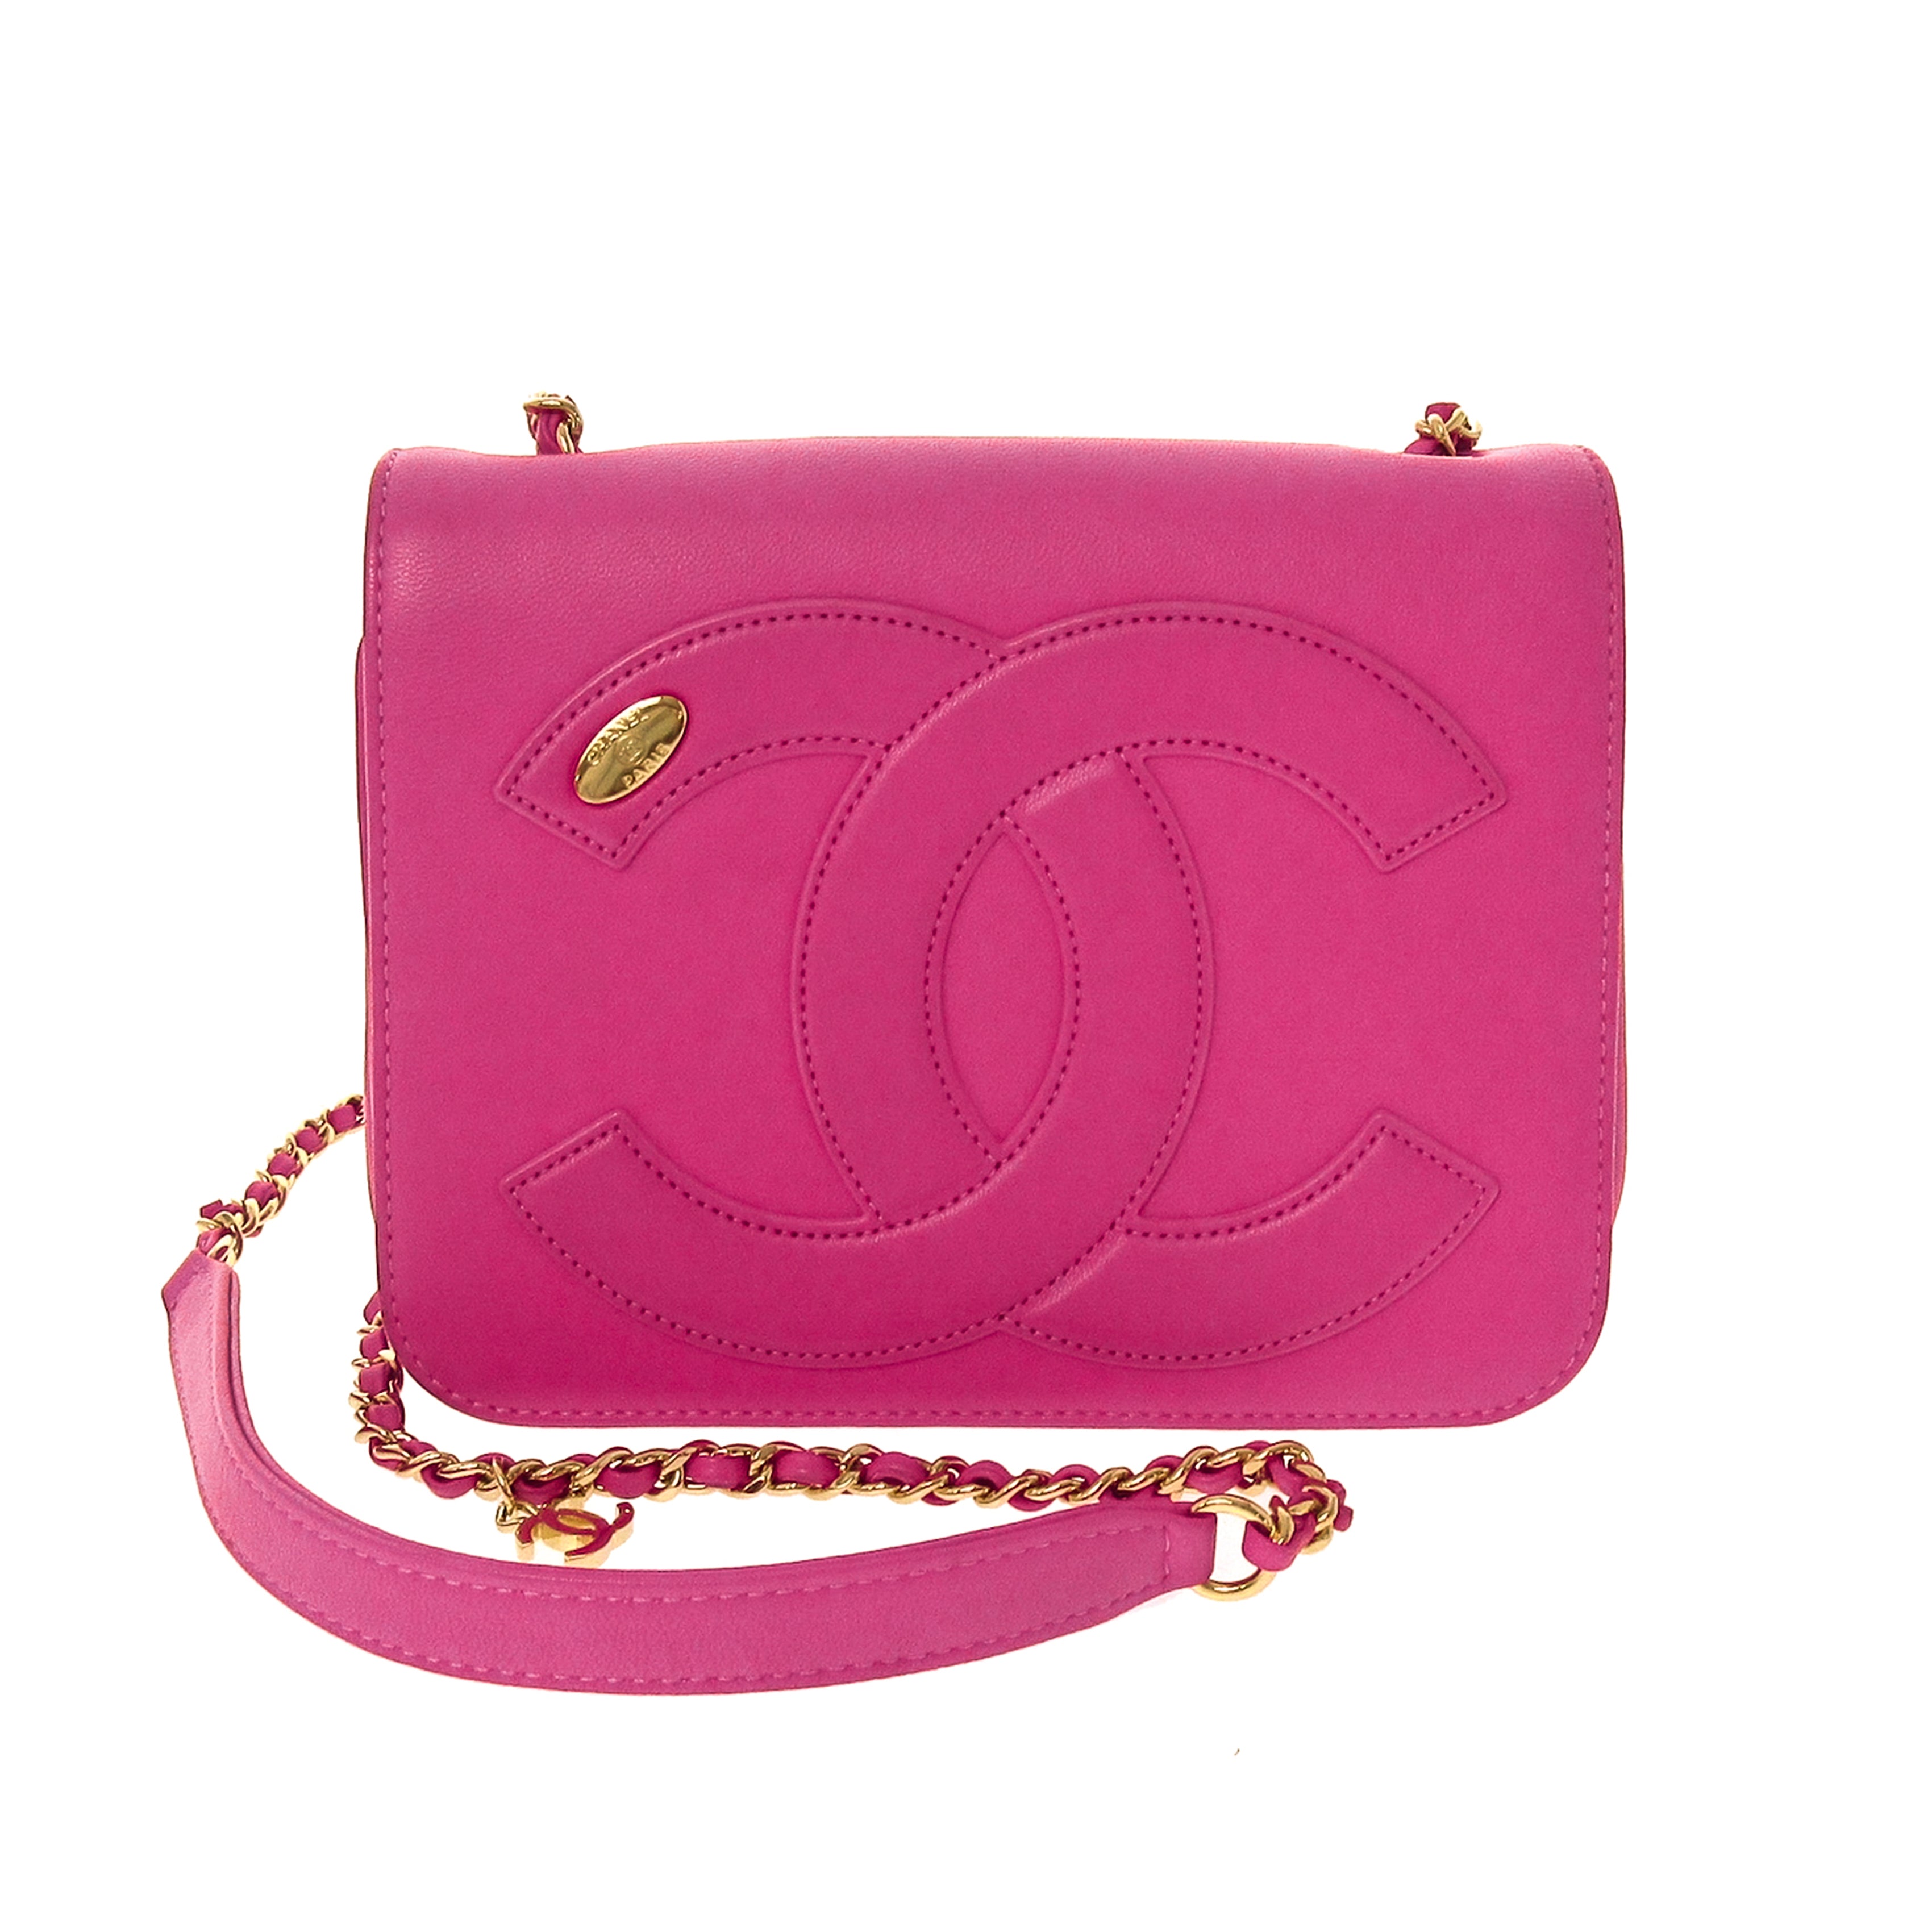 CHANEL  Classic Flap Strass Pink Leather Shoulder Bag  Pink chanel bag  Chanel shoulder bag Chanel bag classic